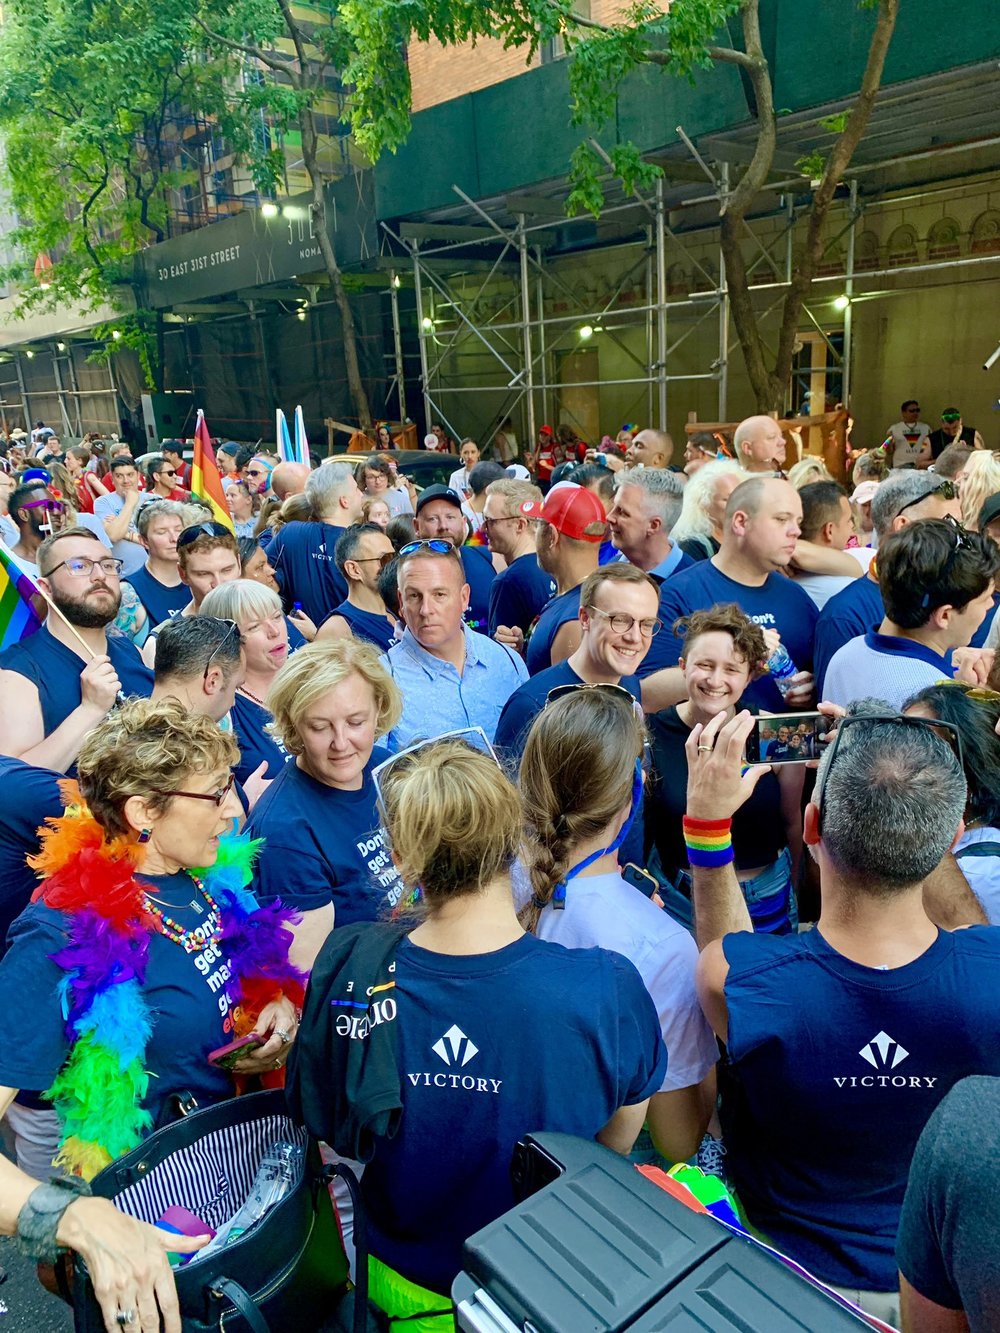  On the campaign trail Jun-Jul 2019. Posted by Emily Voorde on Twitter. ( LINK)  